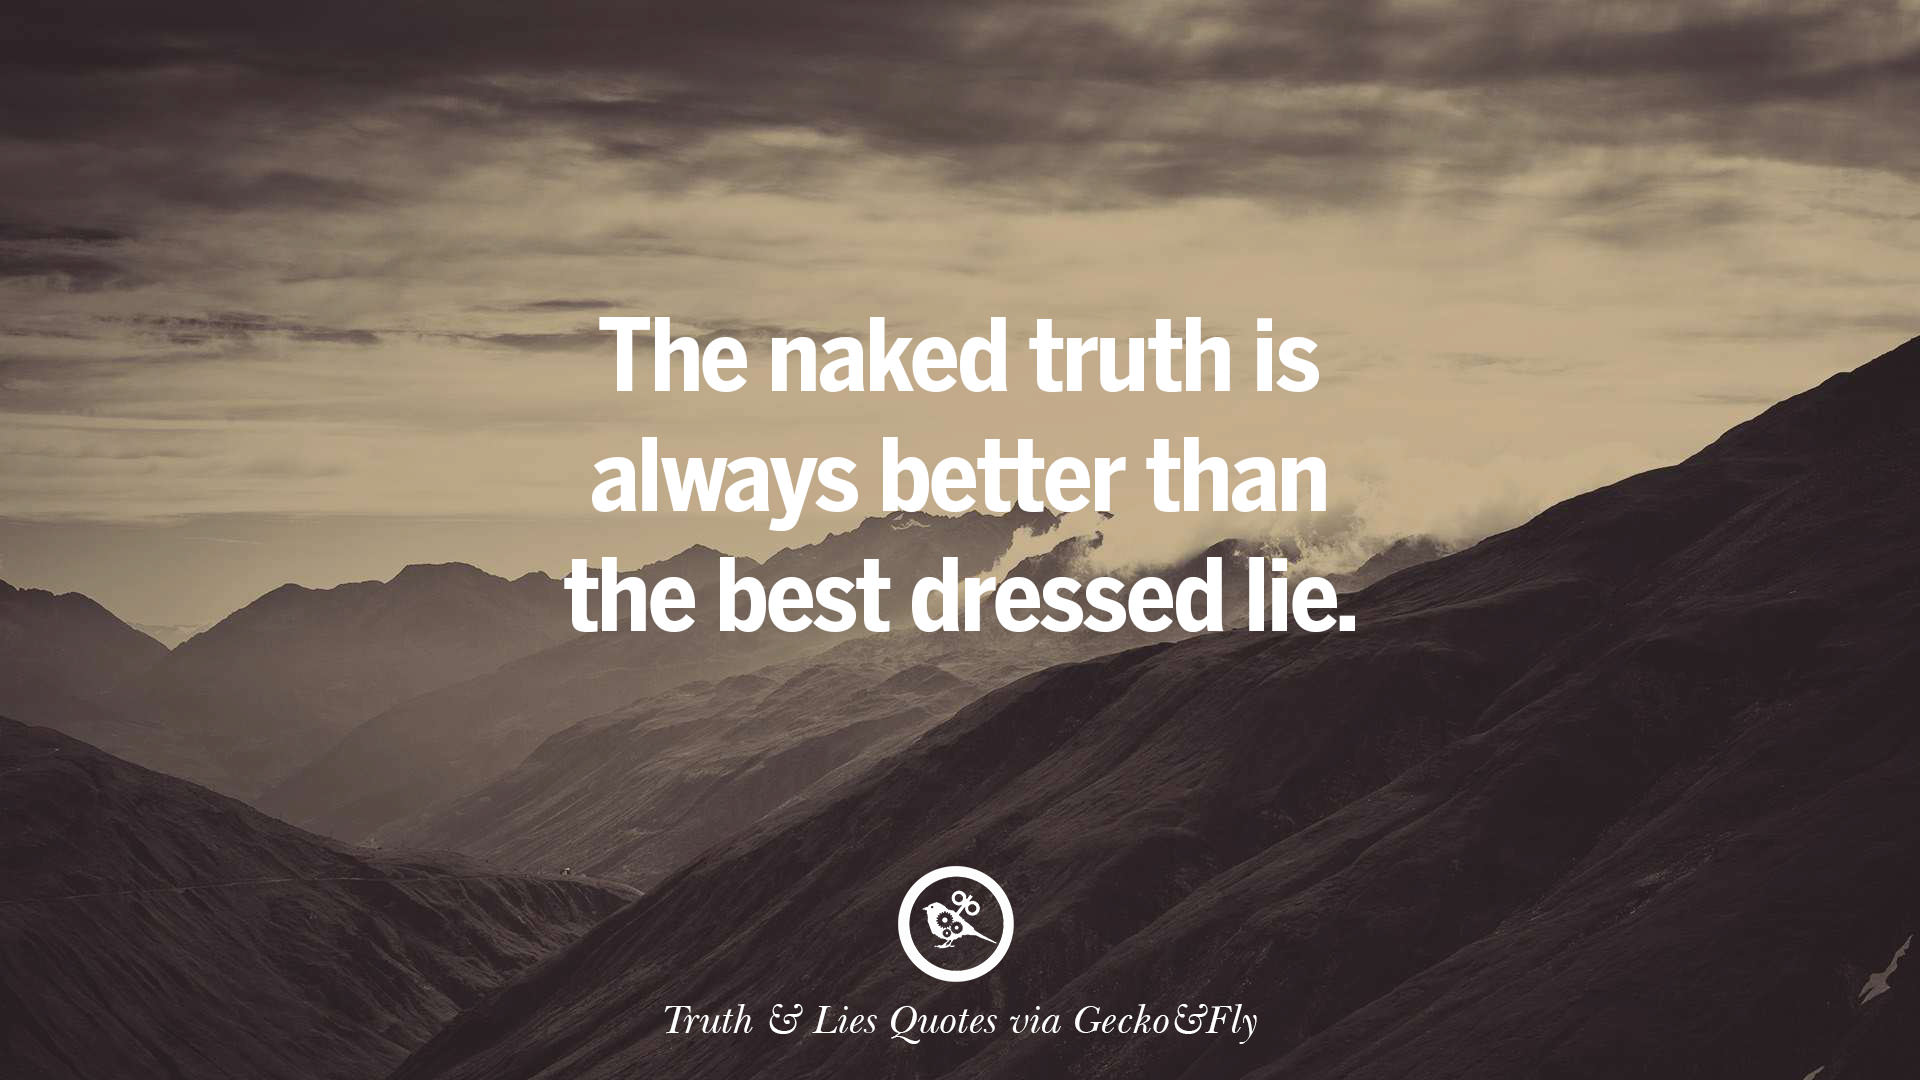 The naked truth is always better than the best dressed lie. 